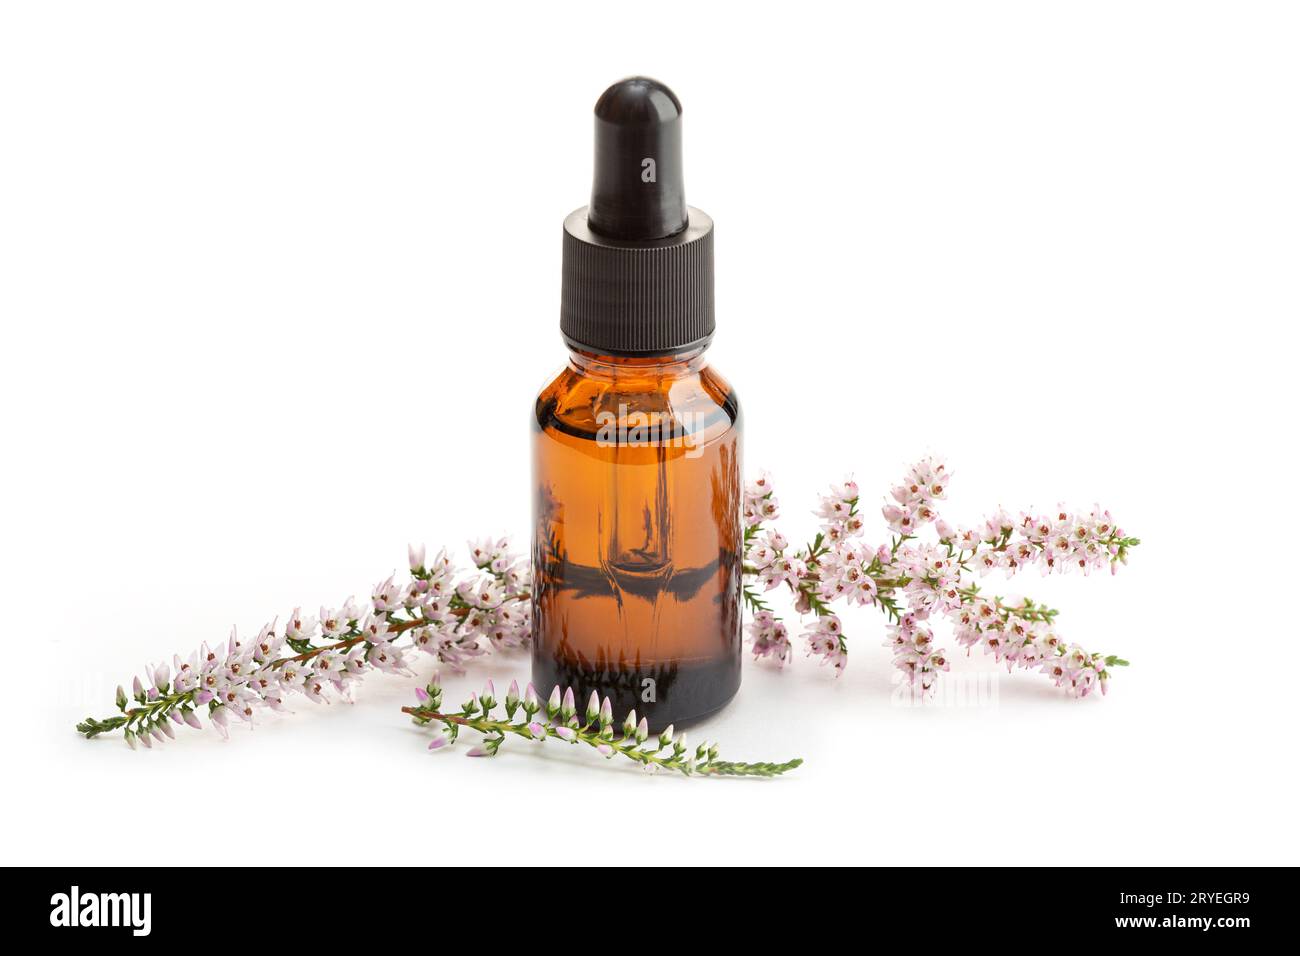 Heather essential oil on amber bottle isolated on white background Stock Photo